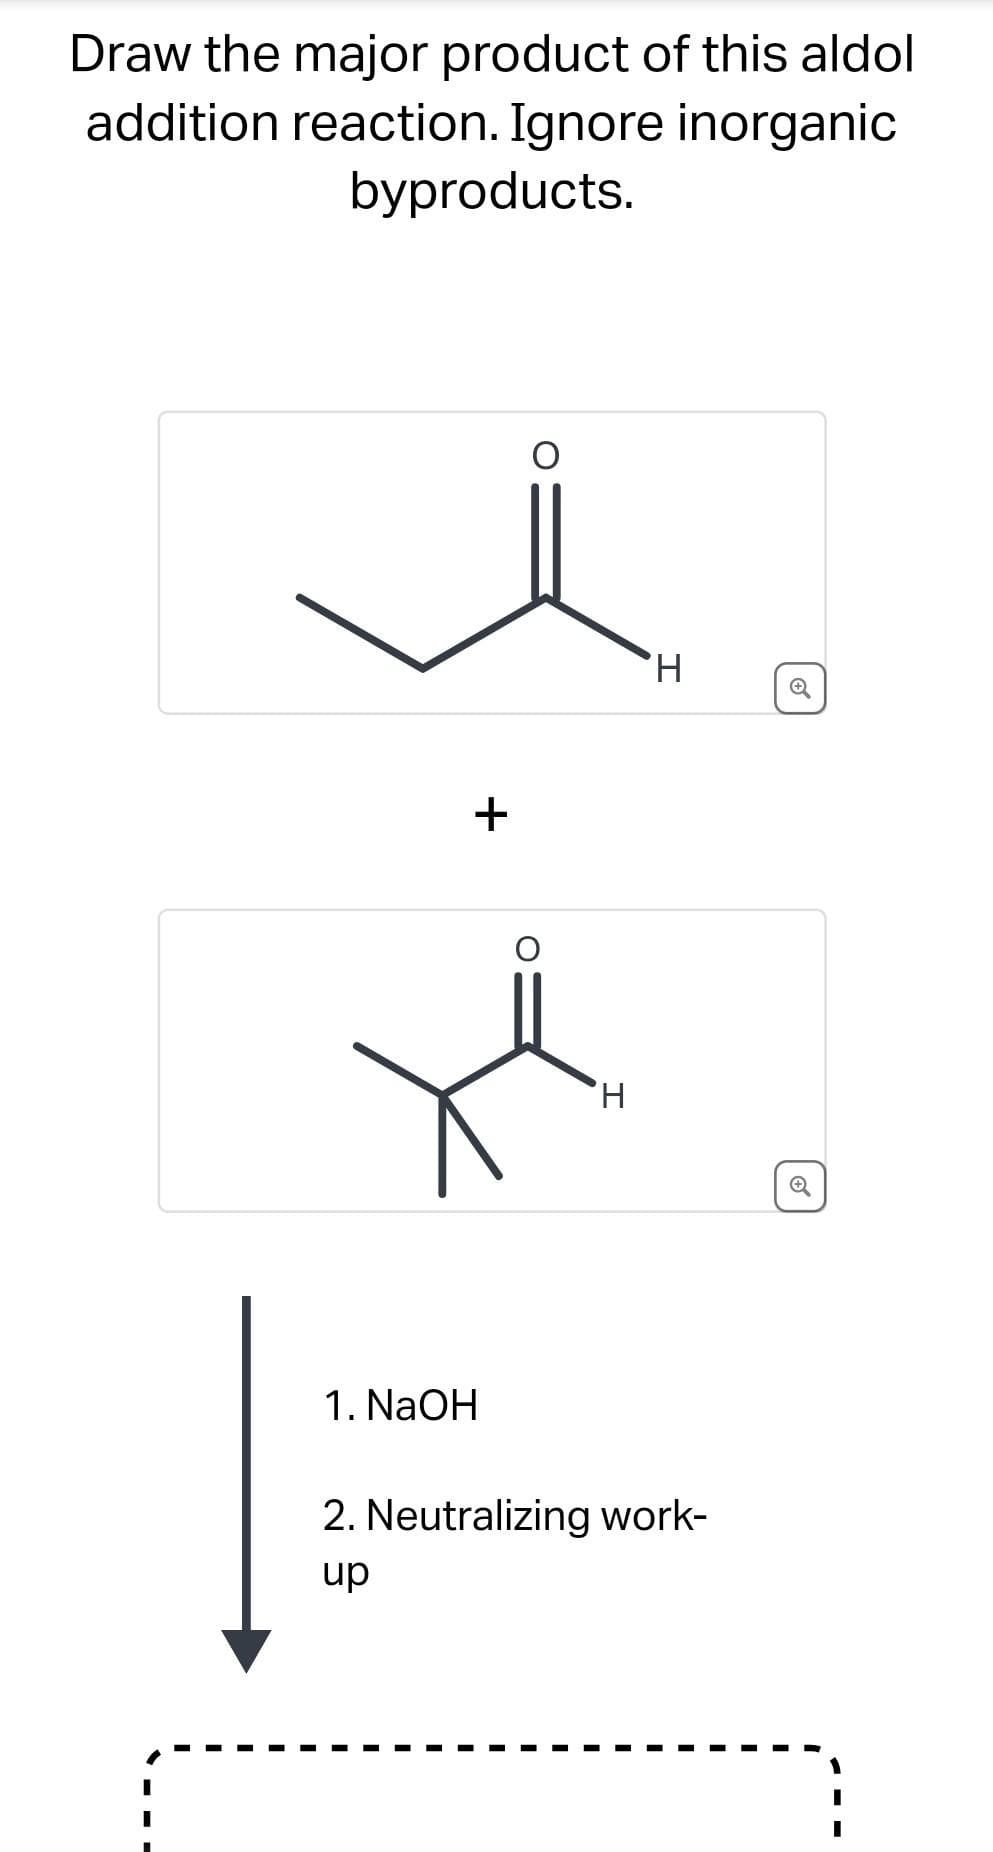 Draw the major product of this aldol
addition reaction. Ignore inorganic
byproducts.
+
1. NaOH
H
H
2. Neutralizing work-
up